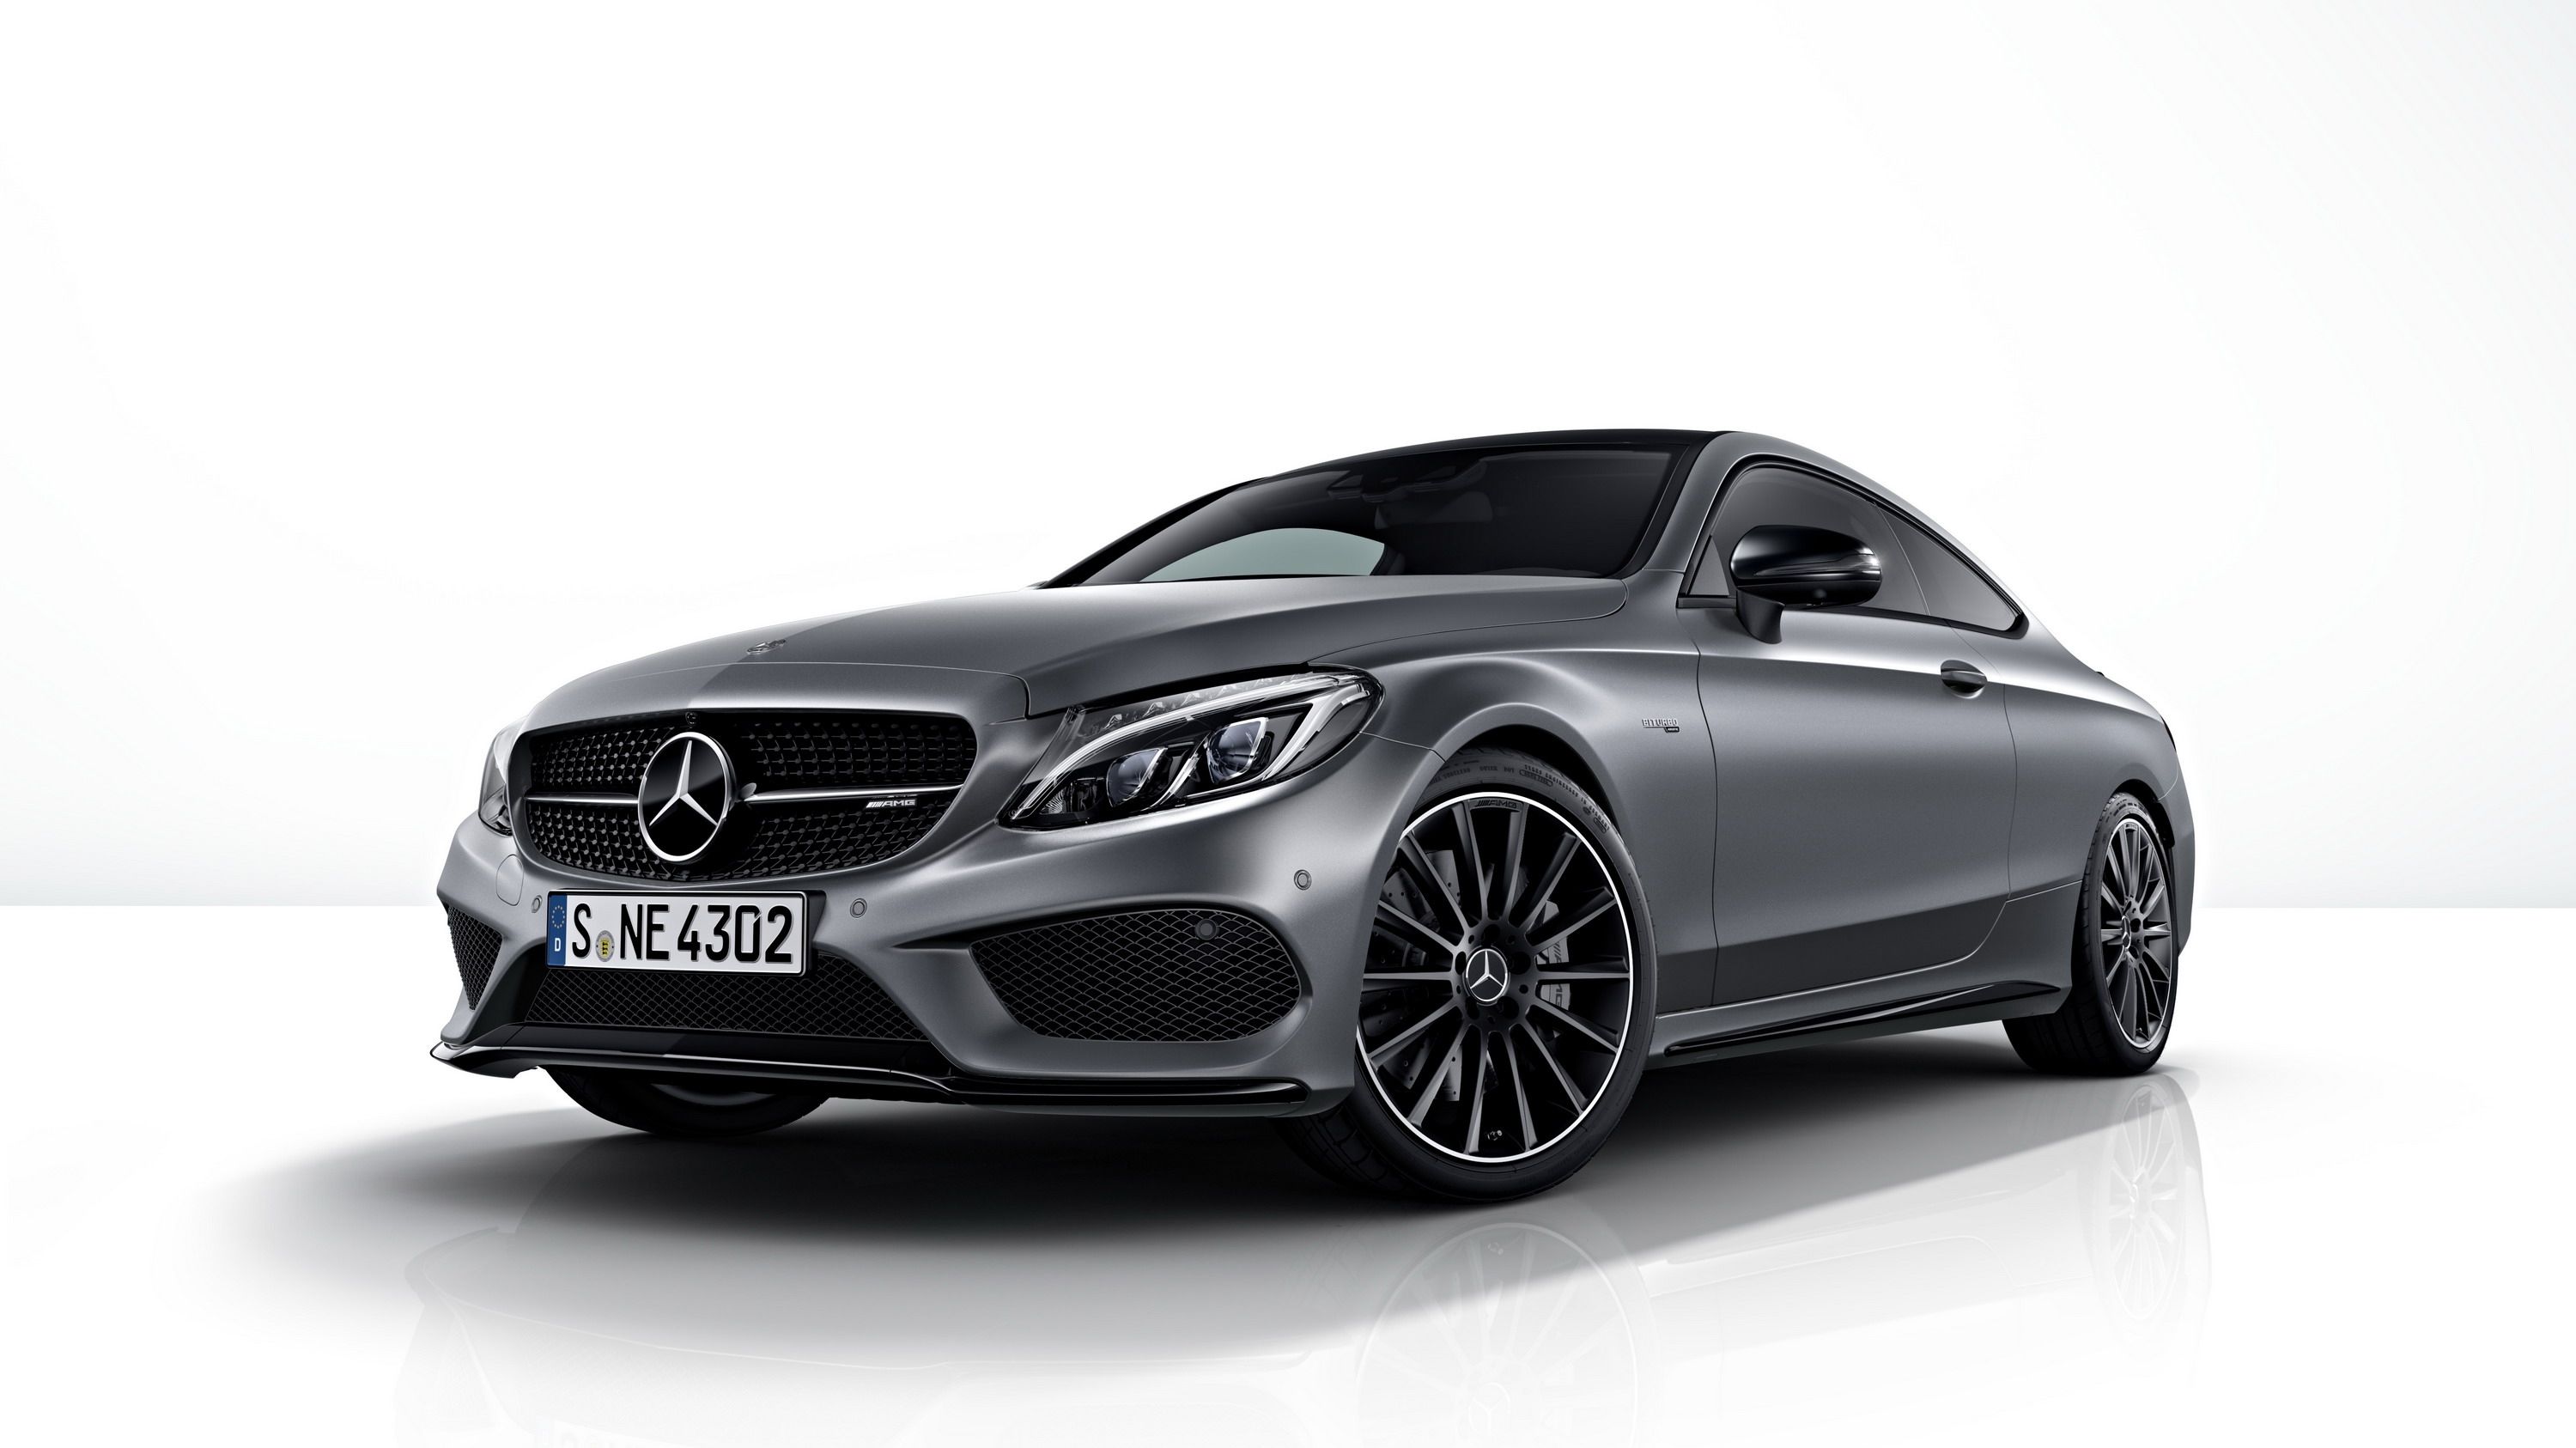 2017 Mercedes-AMG C 43 4MATIC Coupé and Cabriolet Night Edition